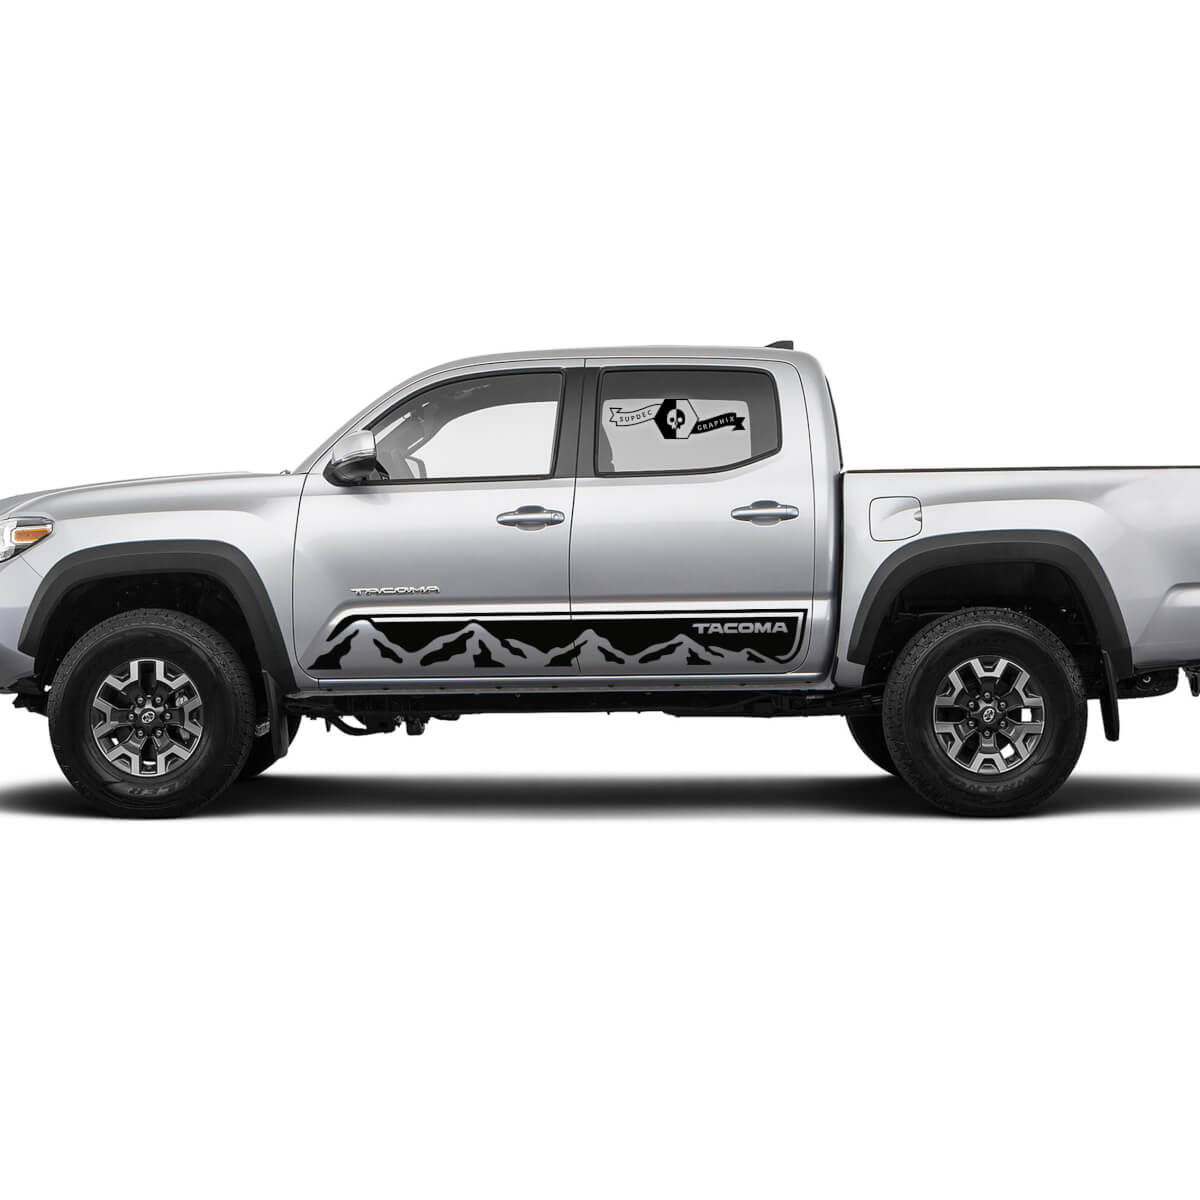 Pair Stripes for Tacoma Side Rocker Mountains Panel Vinyl Stickers Decal fit to Toyota Tacoma 